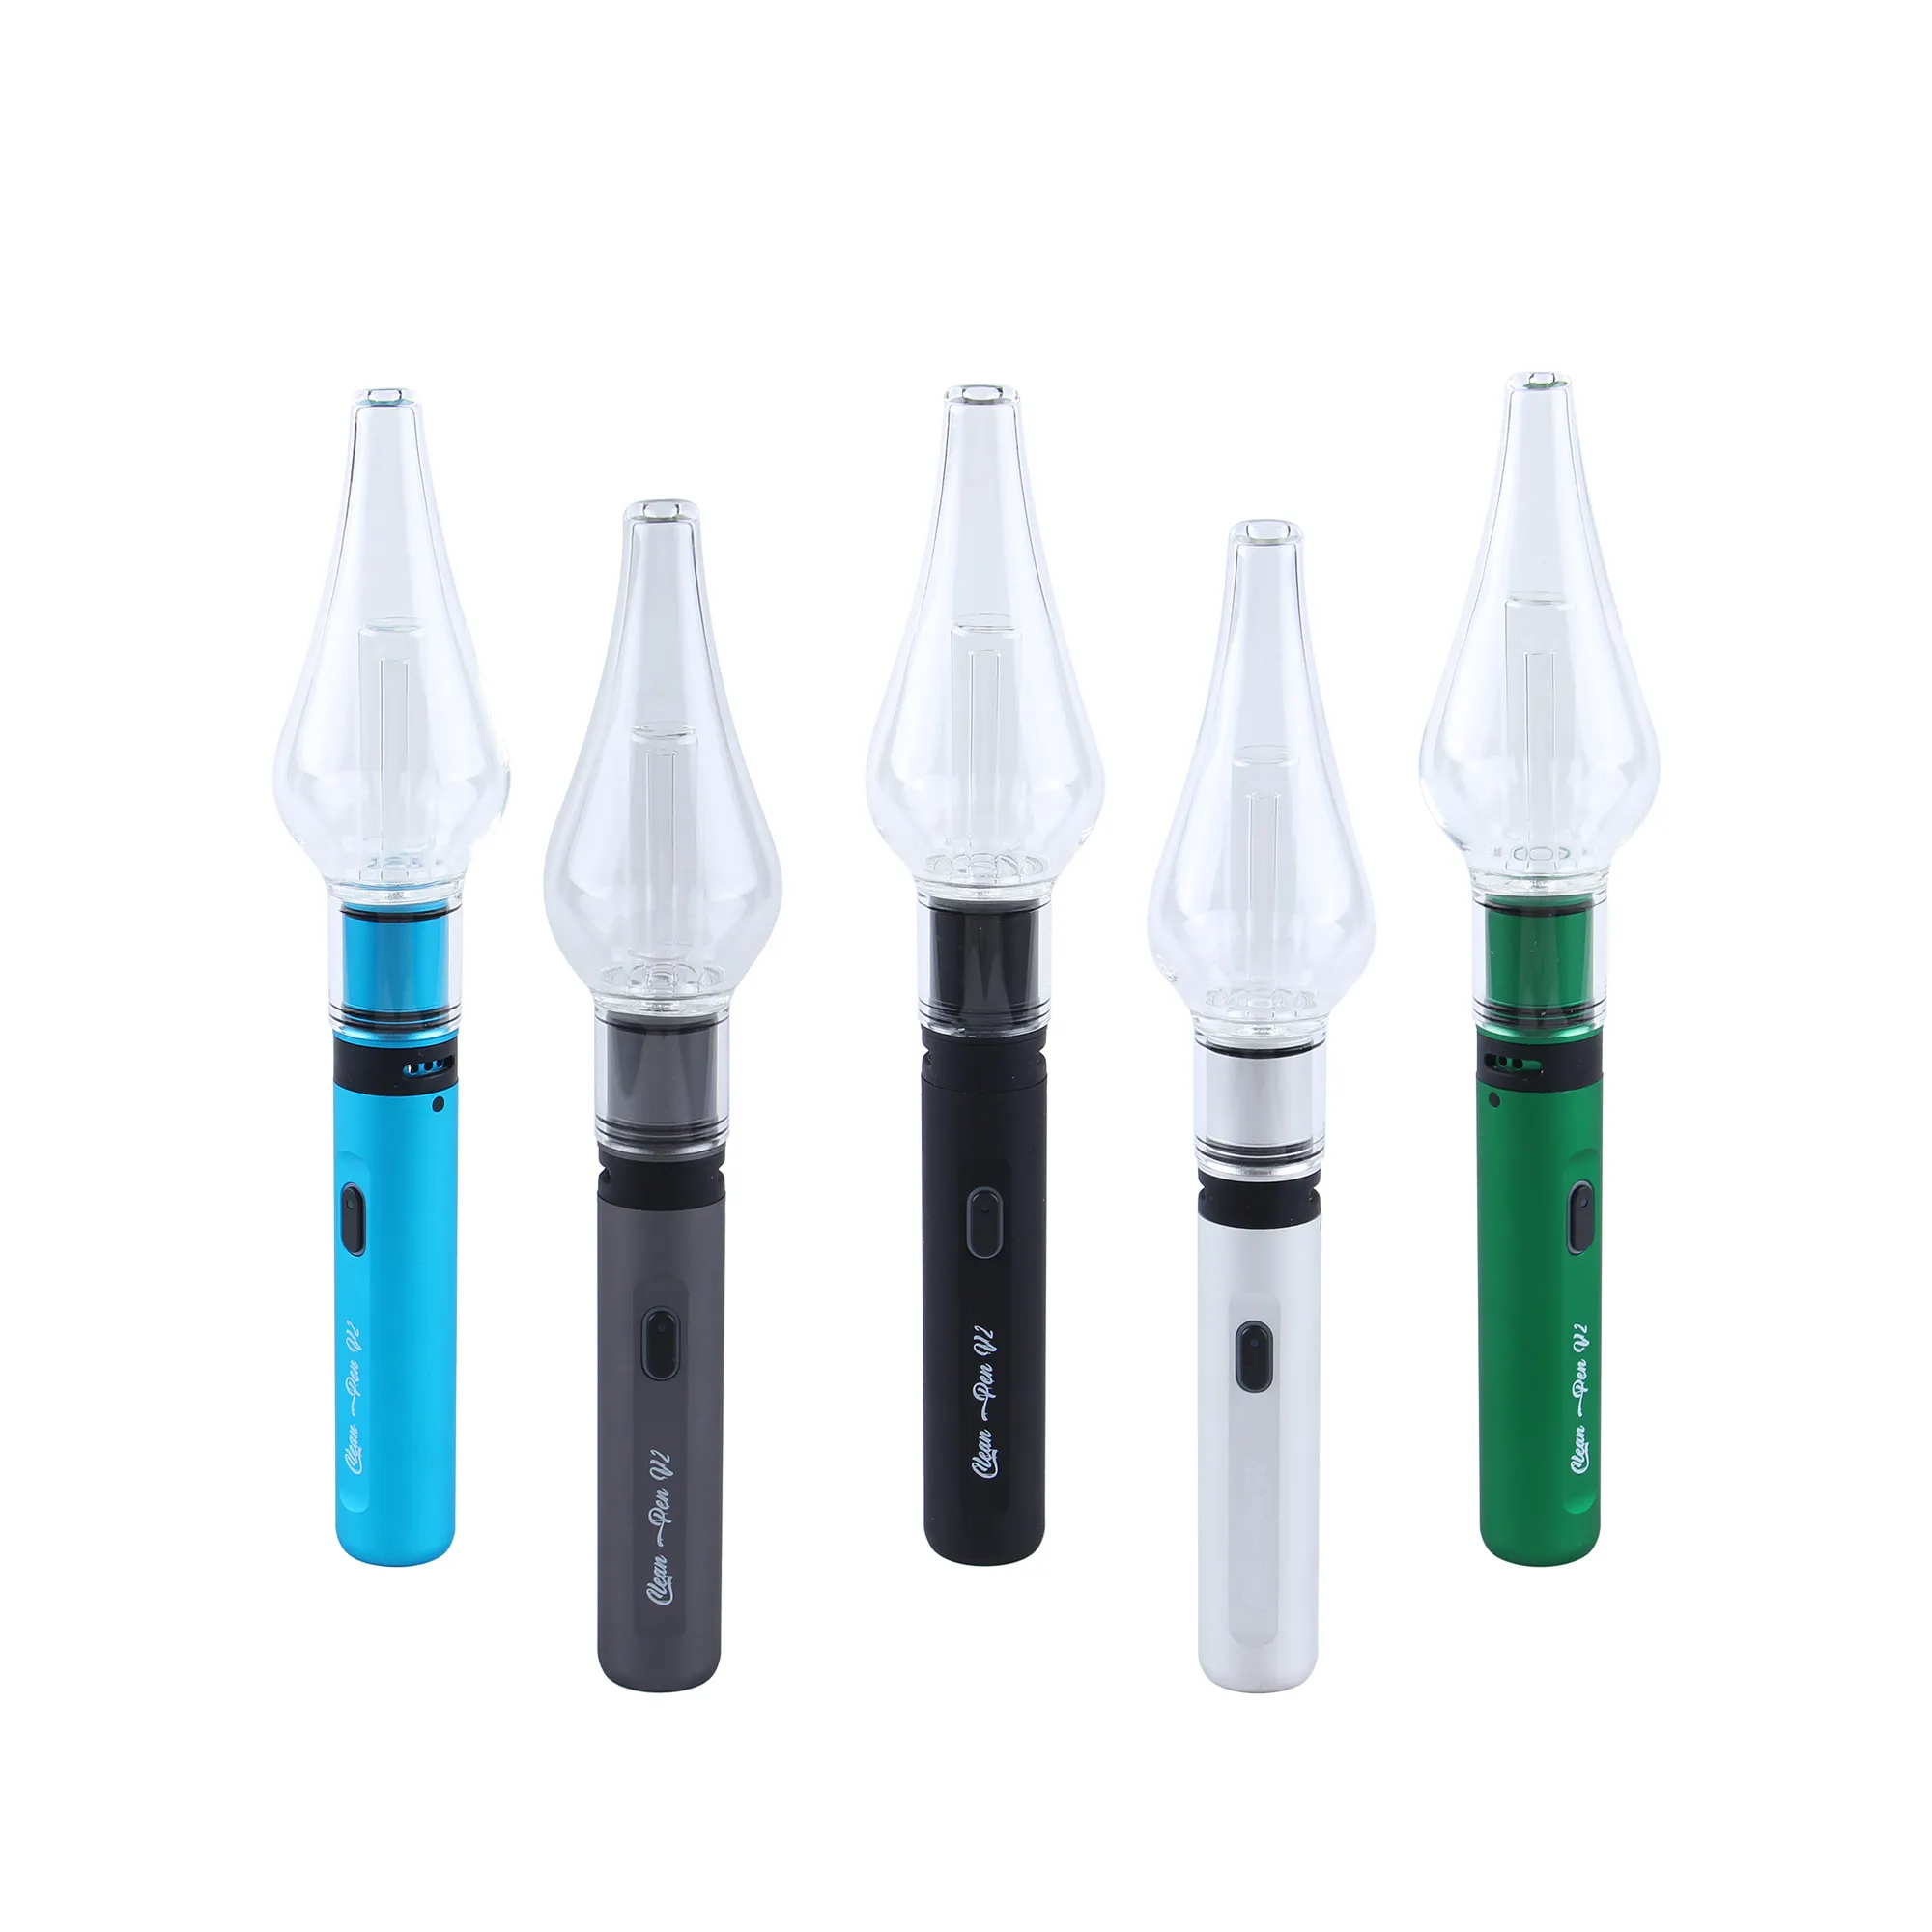 Portable Vapor Device Rechargeable Oil Wax Vaporizer Clean Pen V2 Wax Pen In Hand With 1000mah Rechargeable Battery